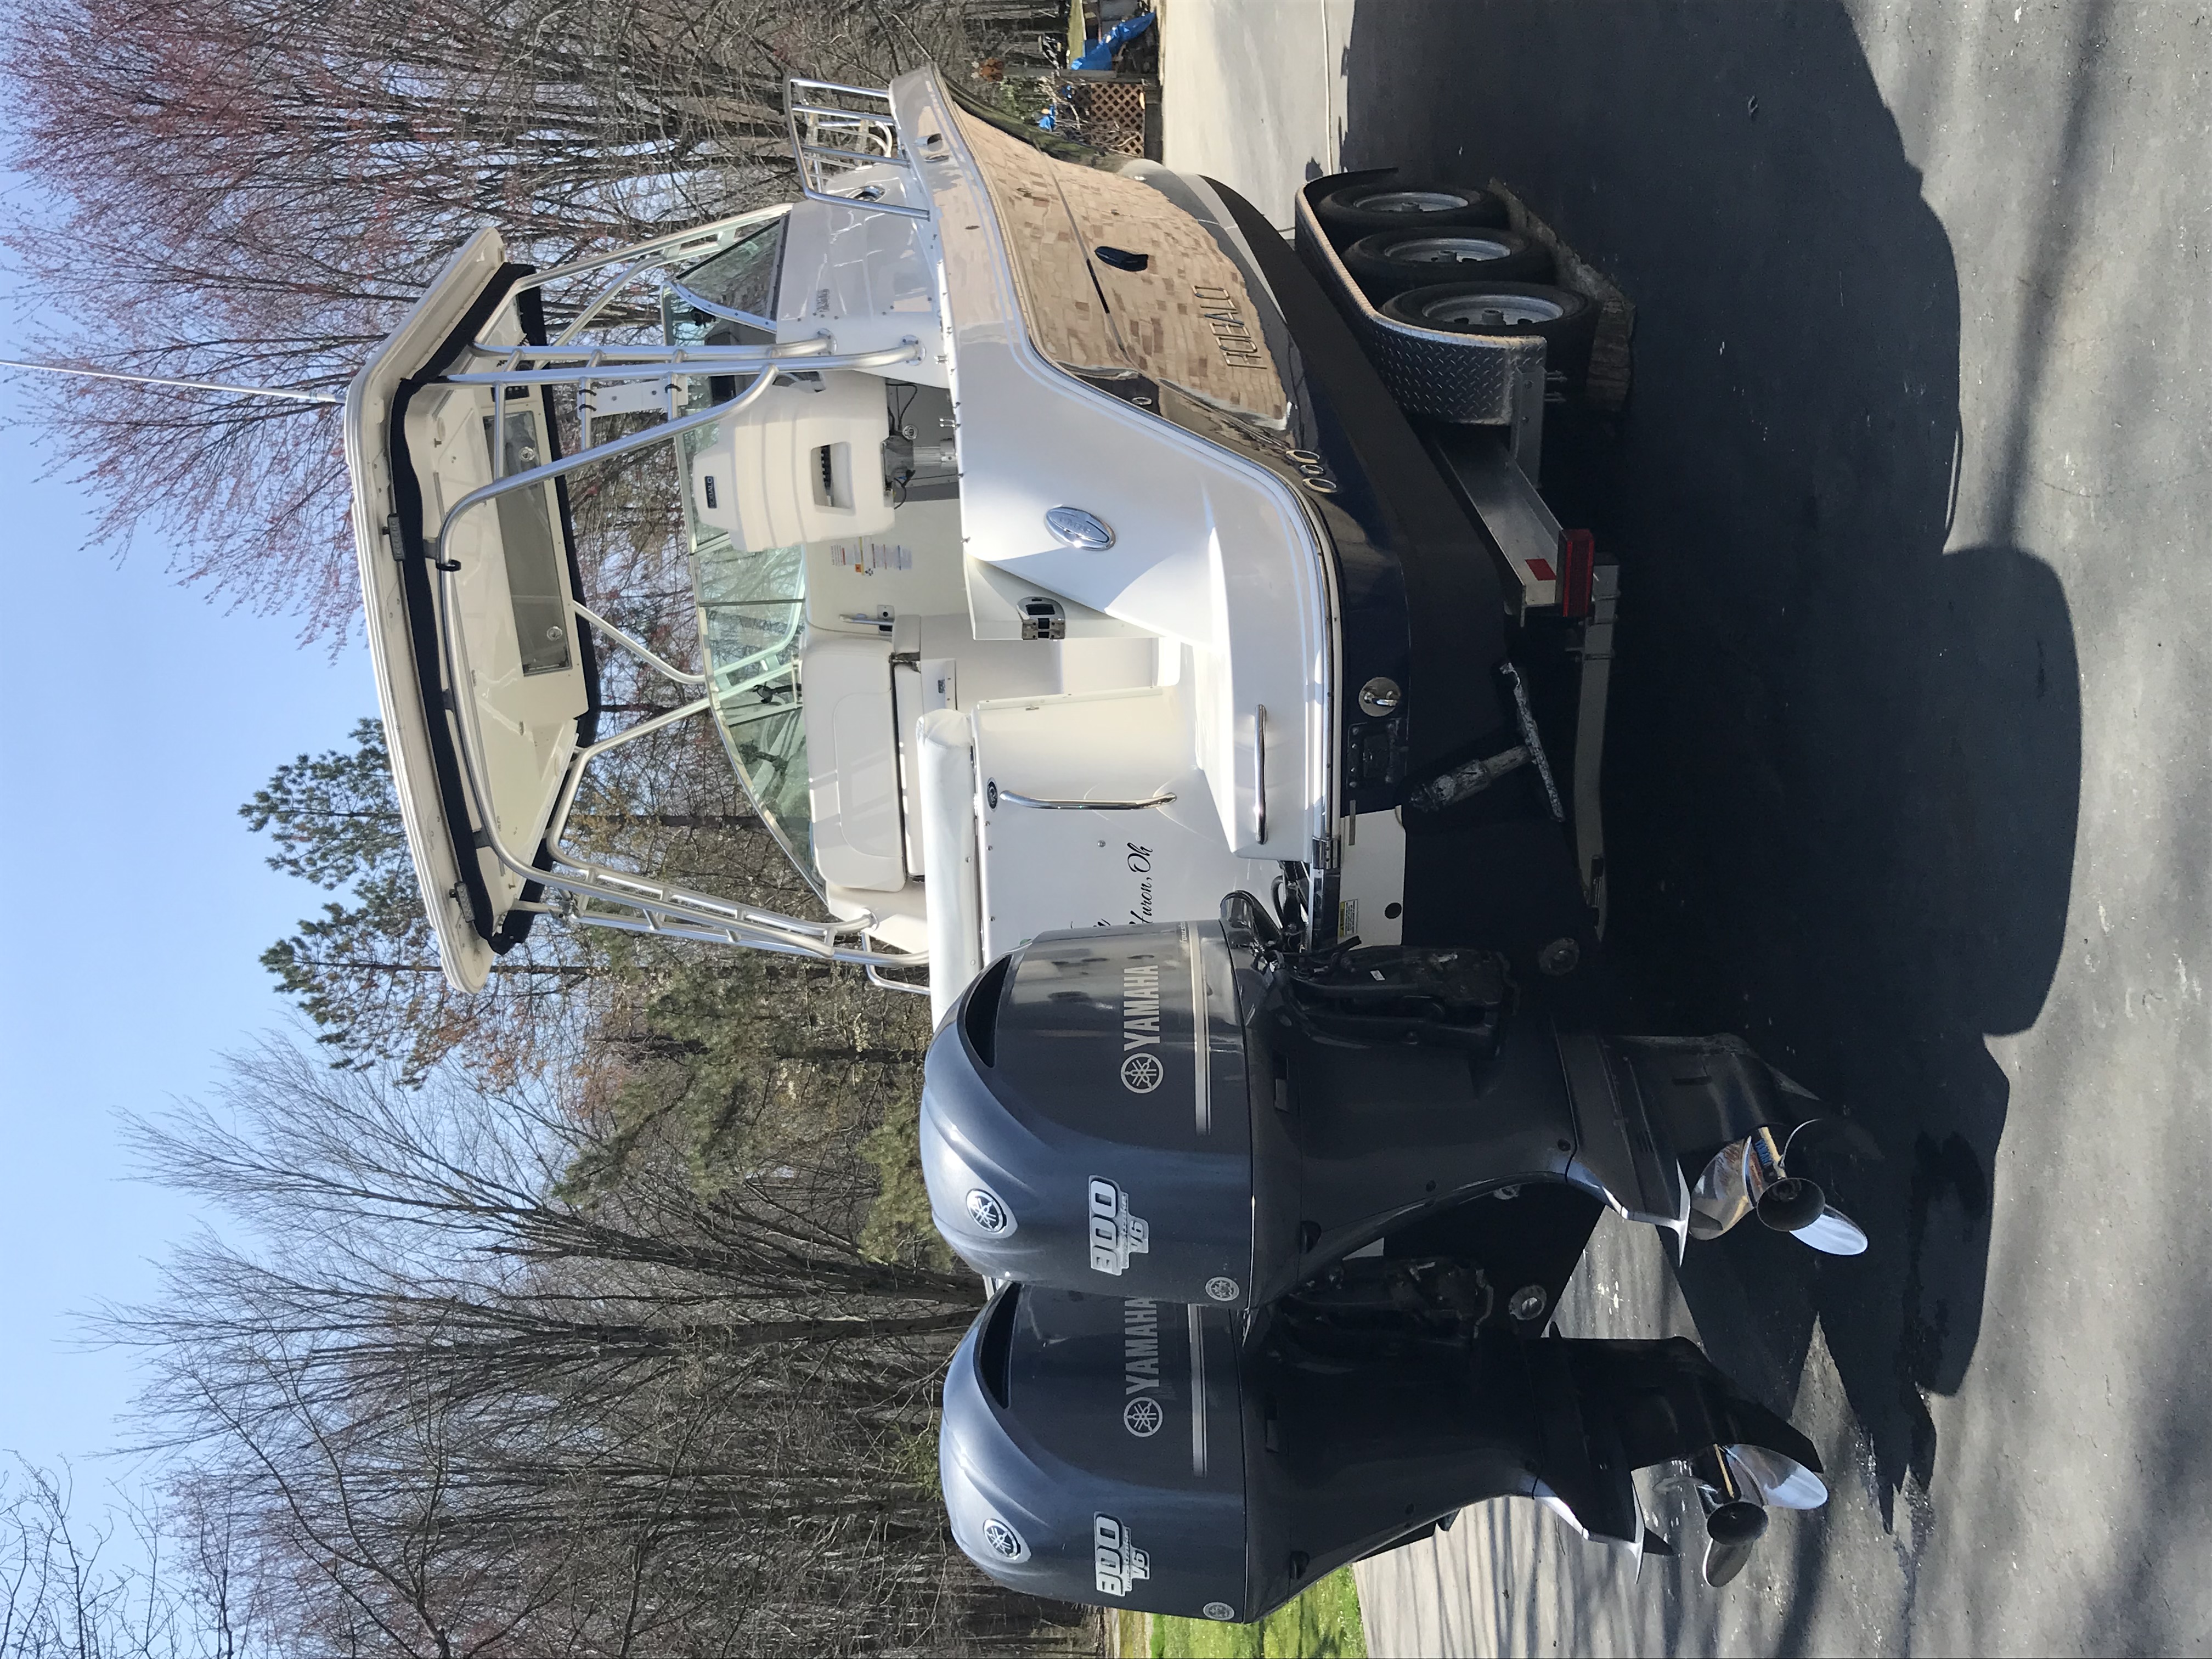 2014 Robalo R 305 wa Power boat for sale in Berlin Hts, OH - image 2 